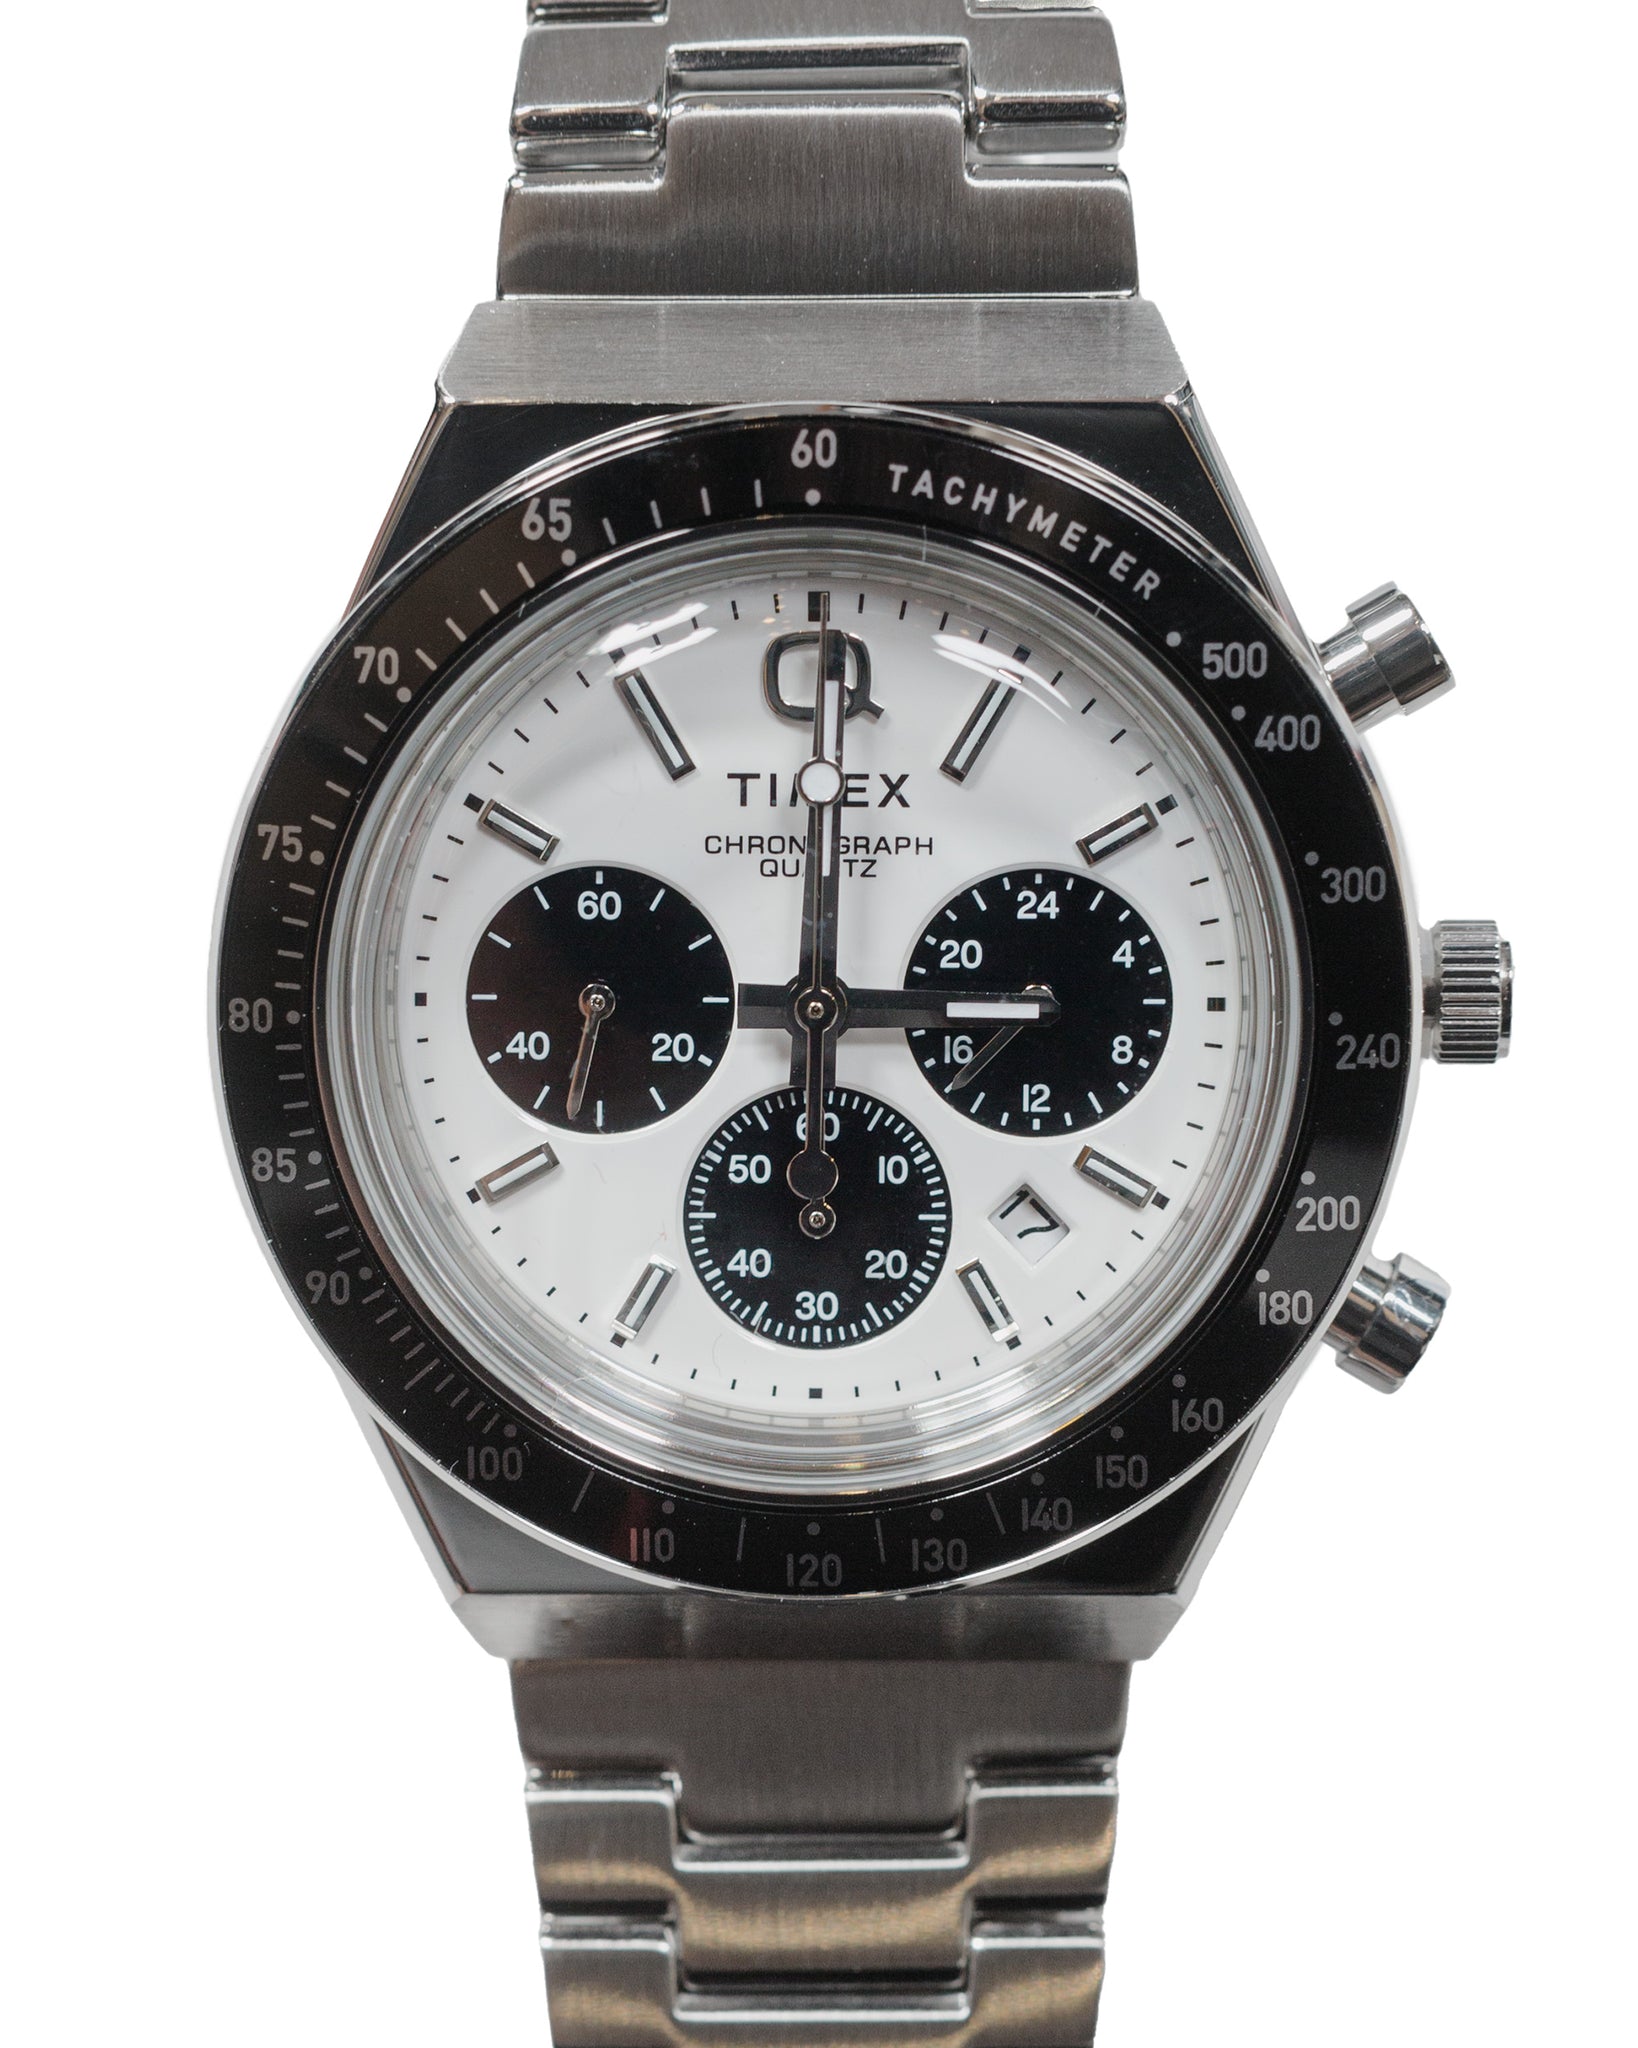 Timex Q Chronograph 40mm watch face